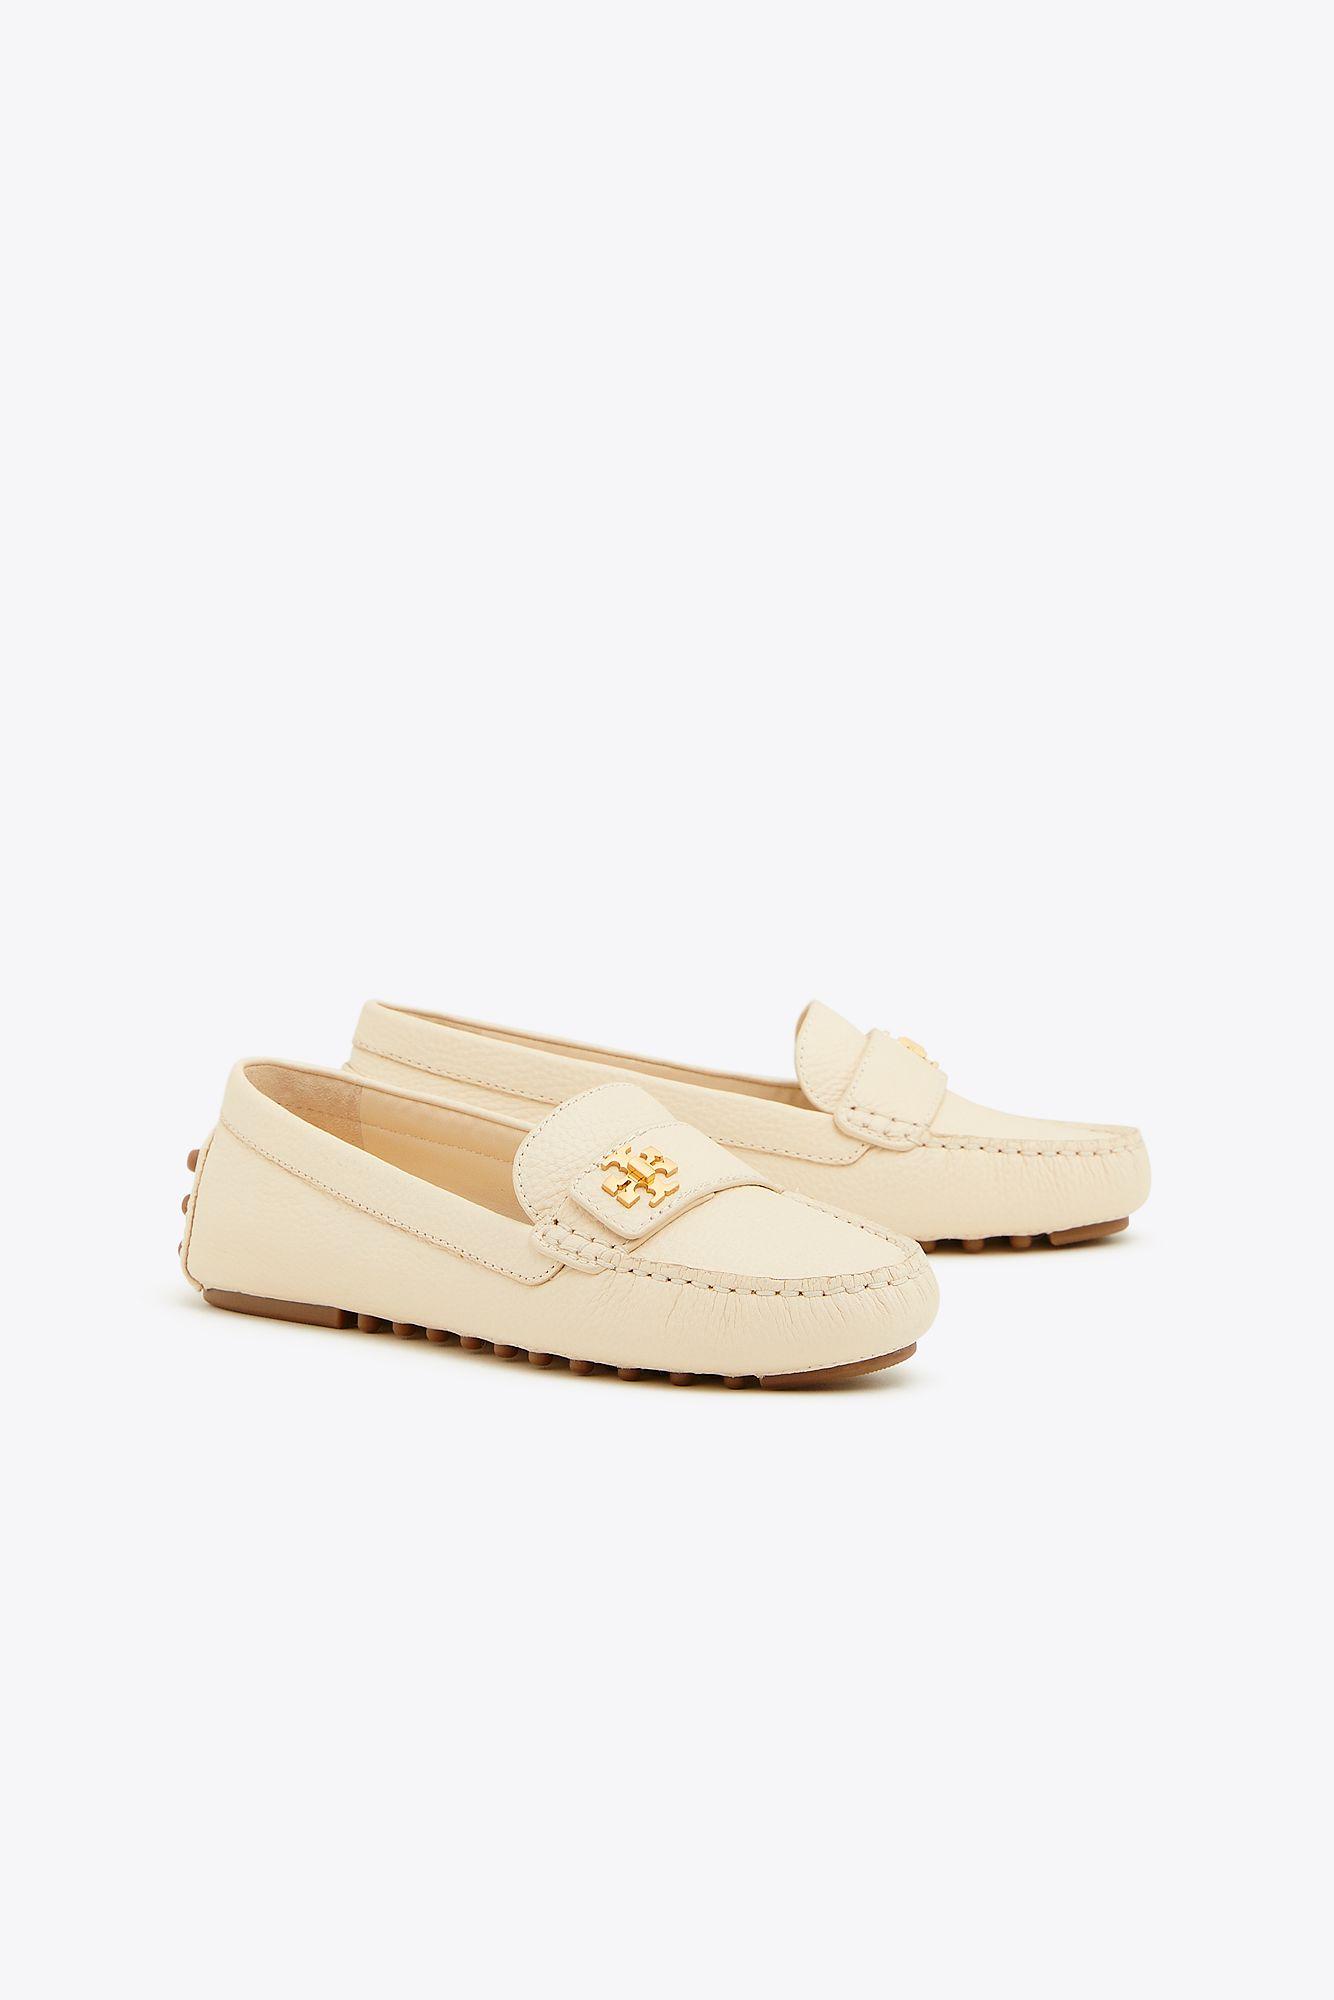 Tory Burch Canvas Kira Driver in Natural - Lyst